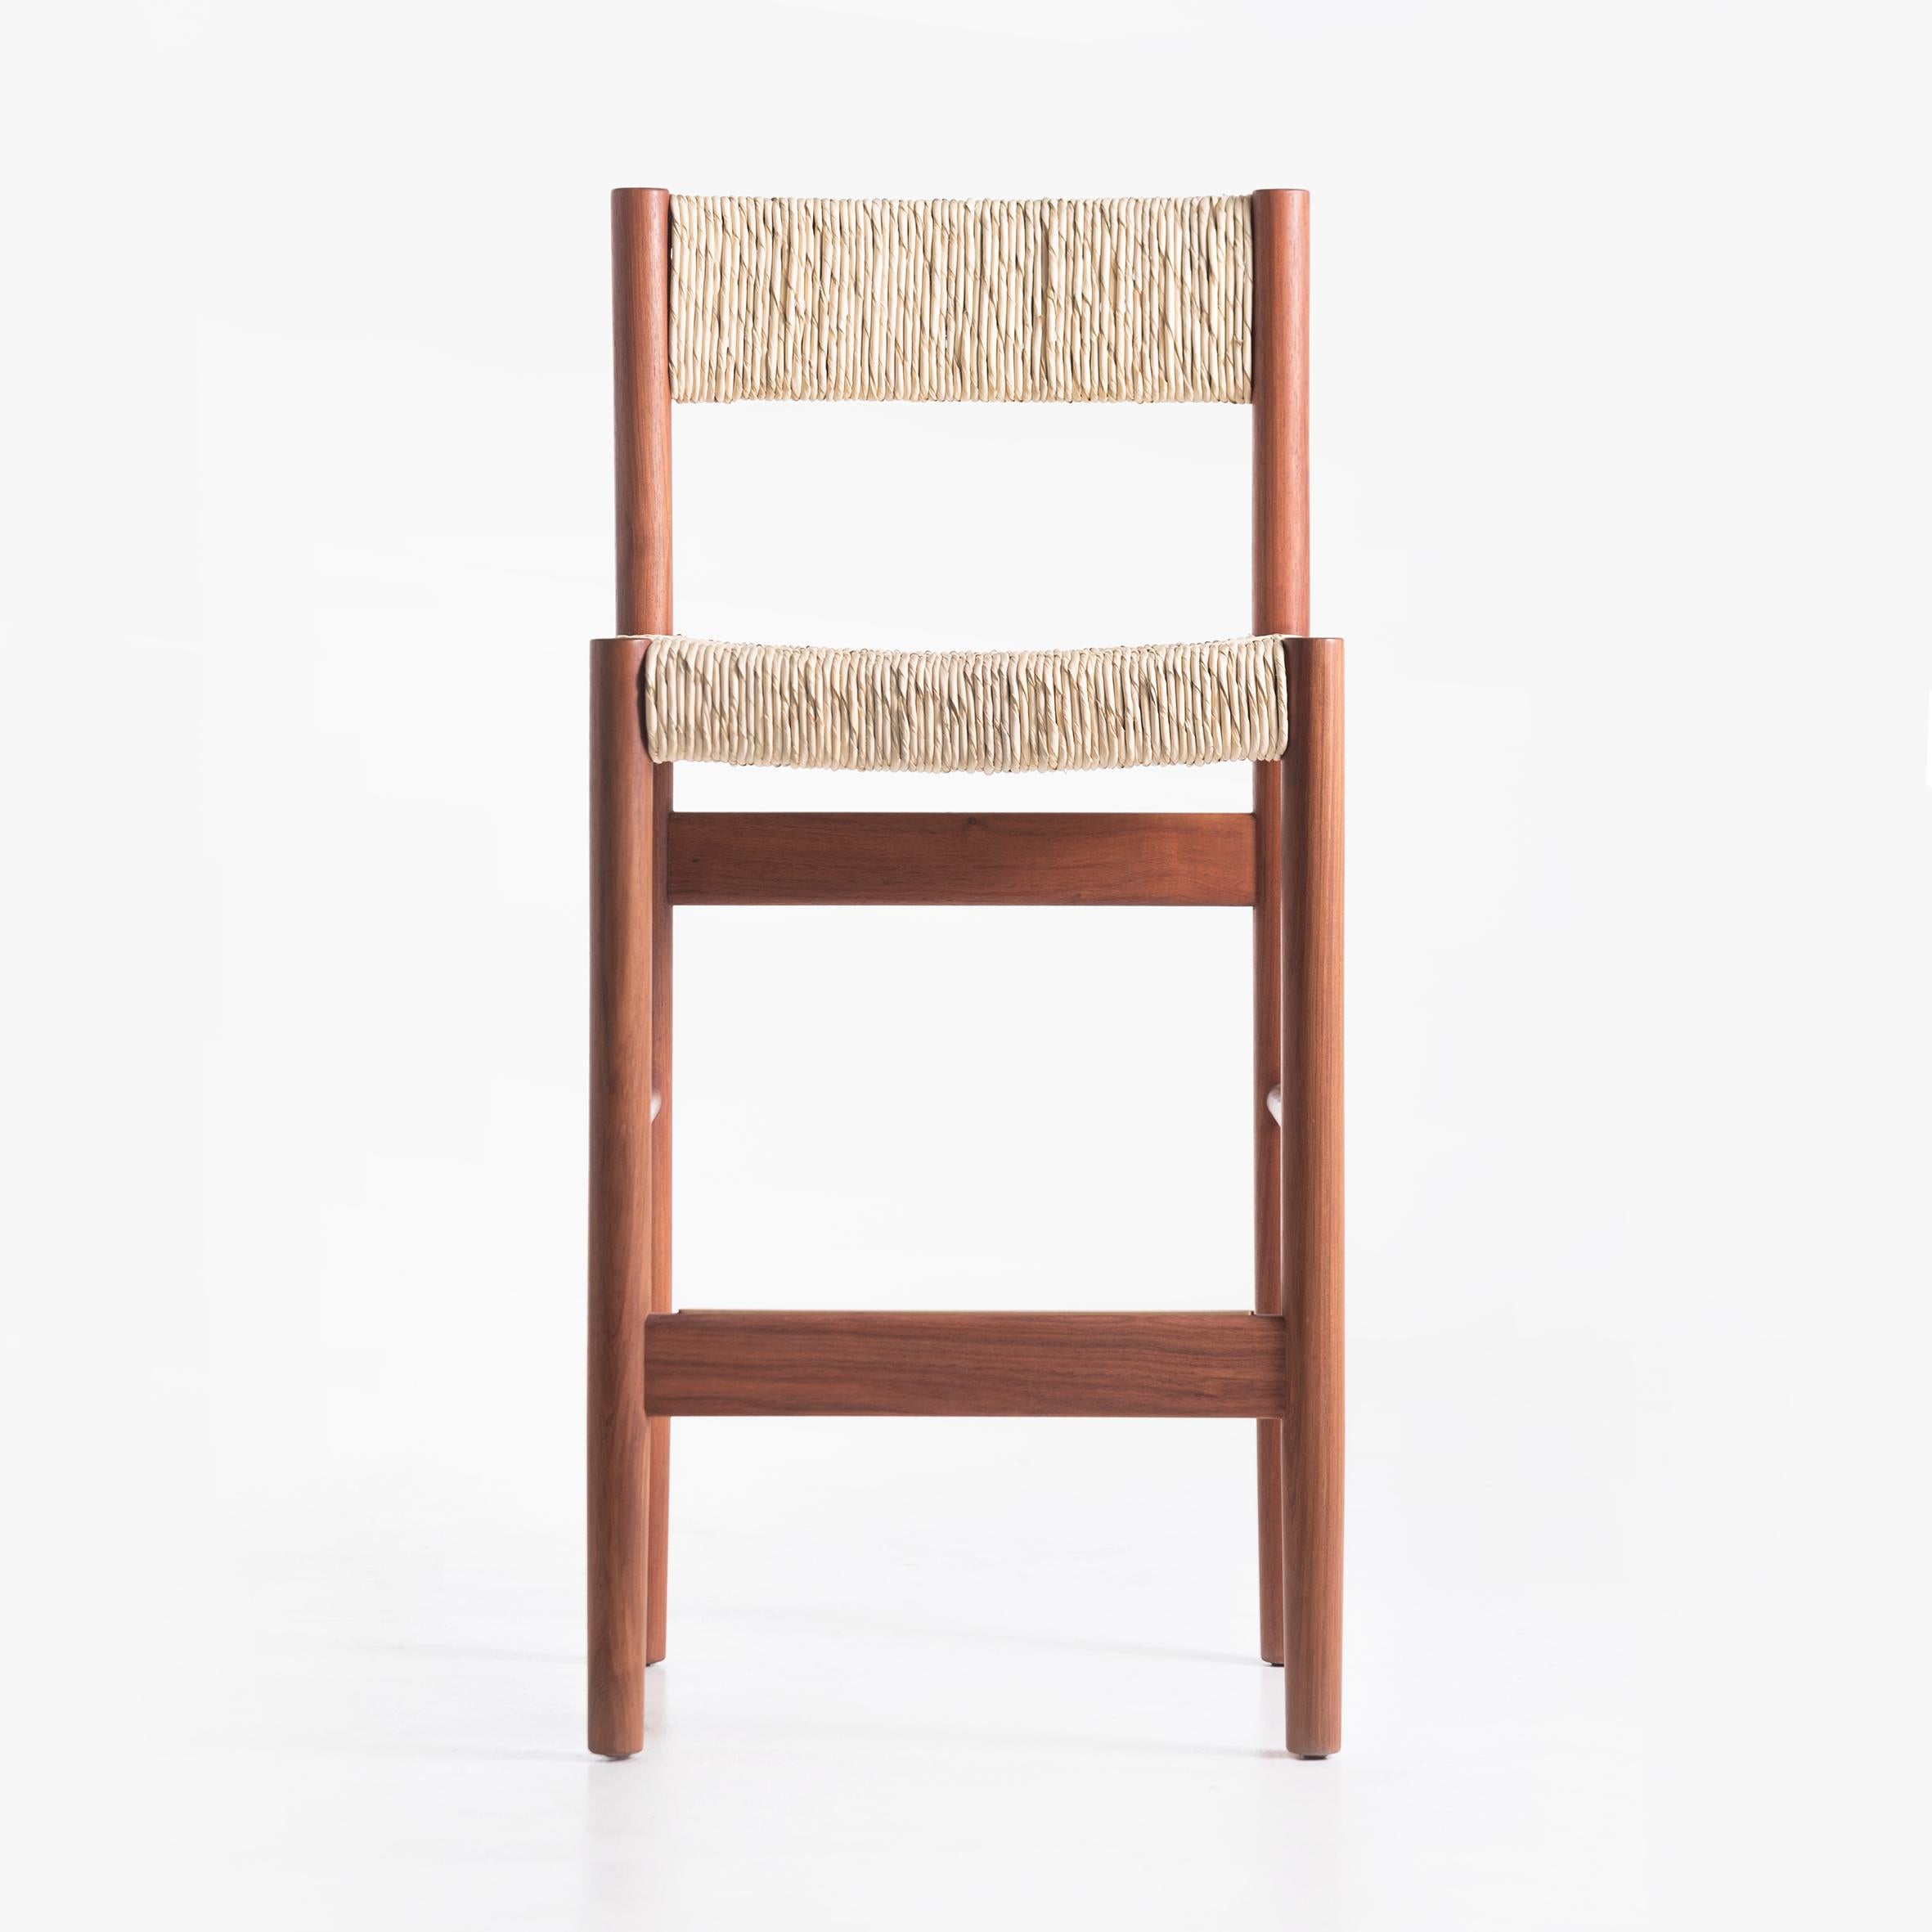 The Miss Clellie stool has an easy-going, casual presence, equally at home in a dining room, as a statement chair, or on a covered veranda. Its design is lightly inspired by Mexican vernacular craft traditions and mid-century classics. The handwoven